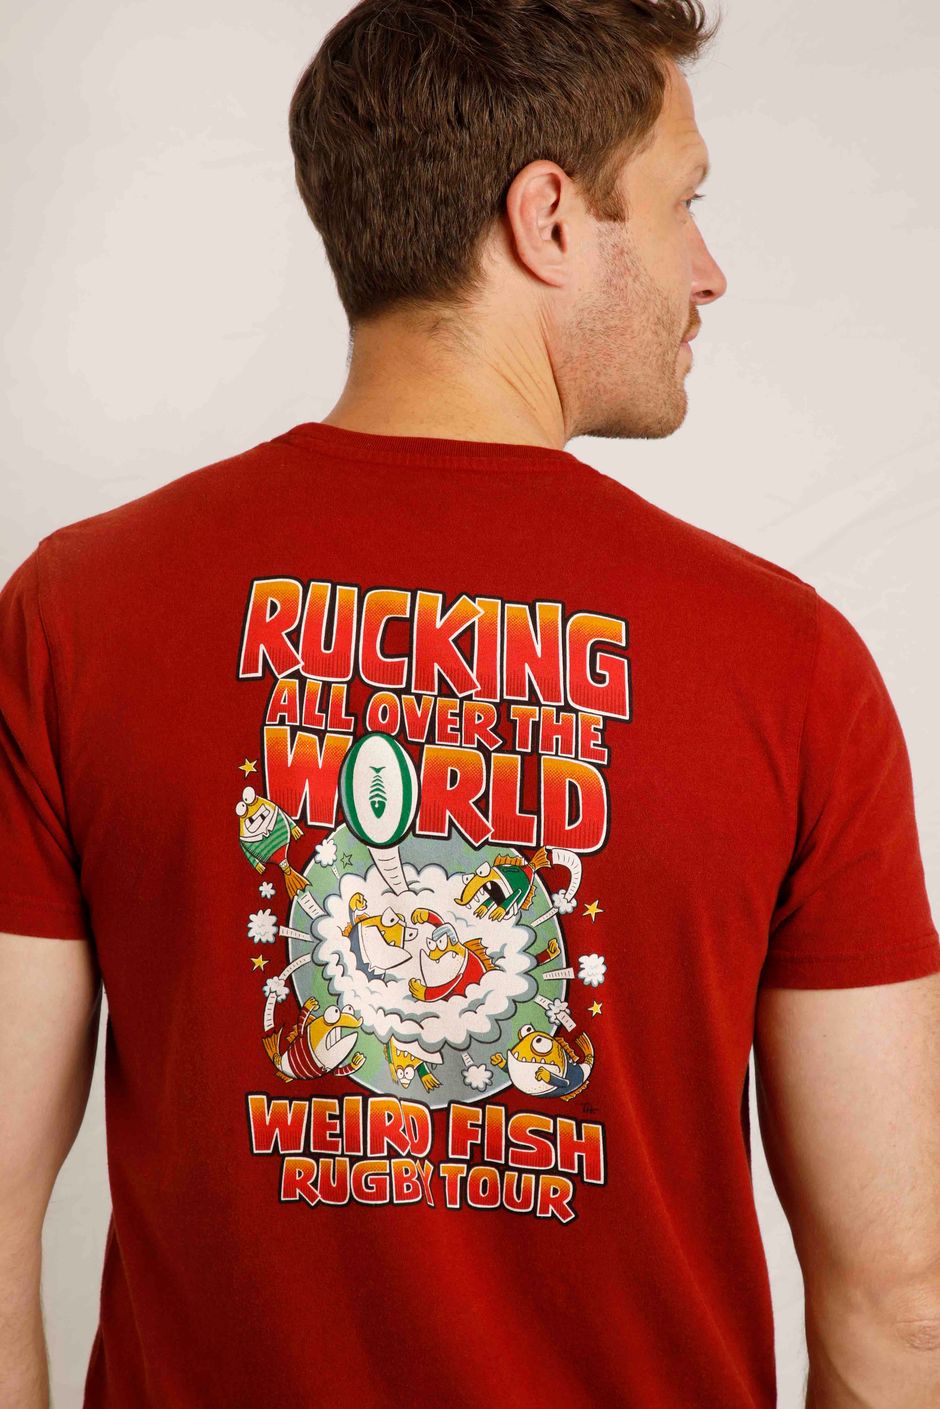 Rucking Heritage Artist T-Shirt Rugby World Cup Foxberry